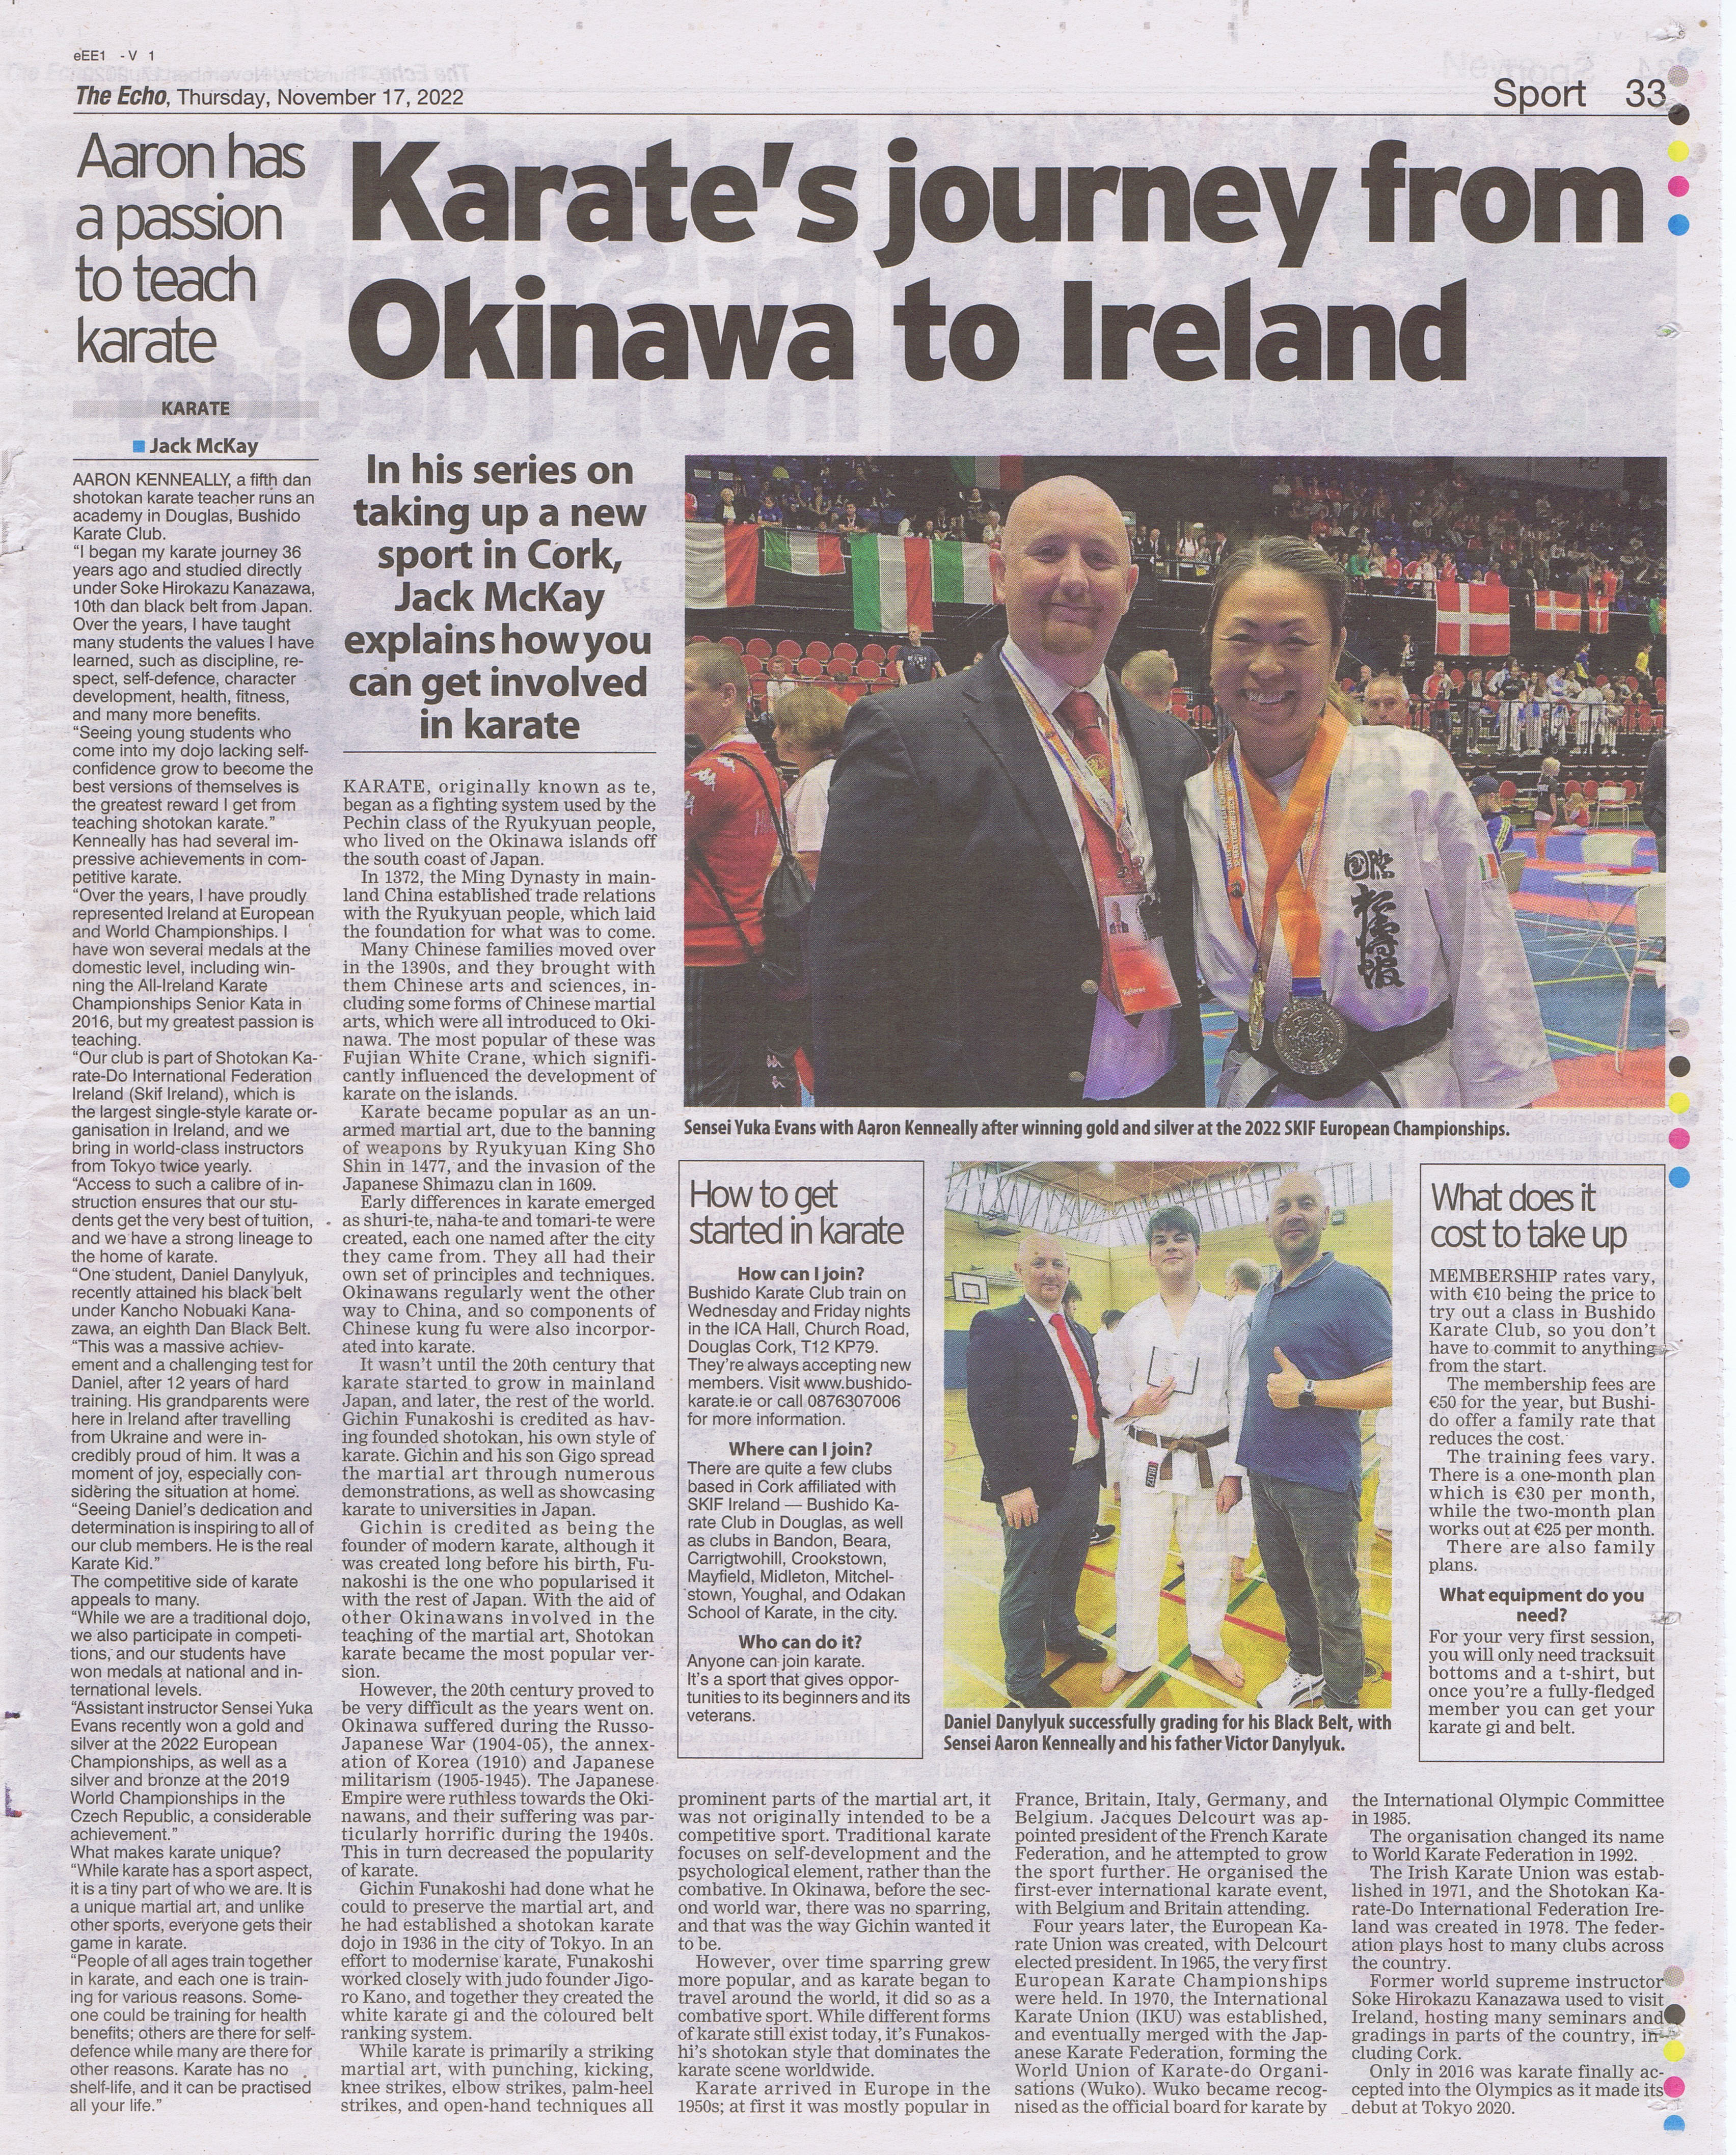 Evening Echo Feature - The Karate Journey from Okinawa to Ireland